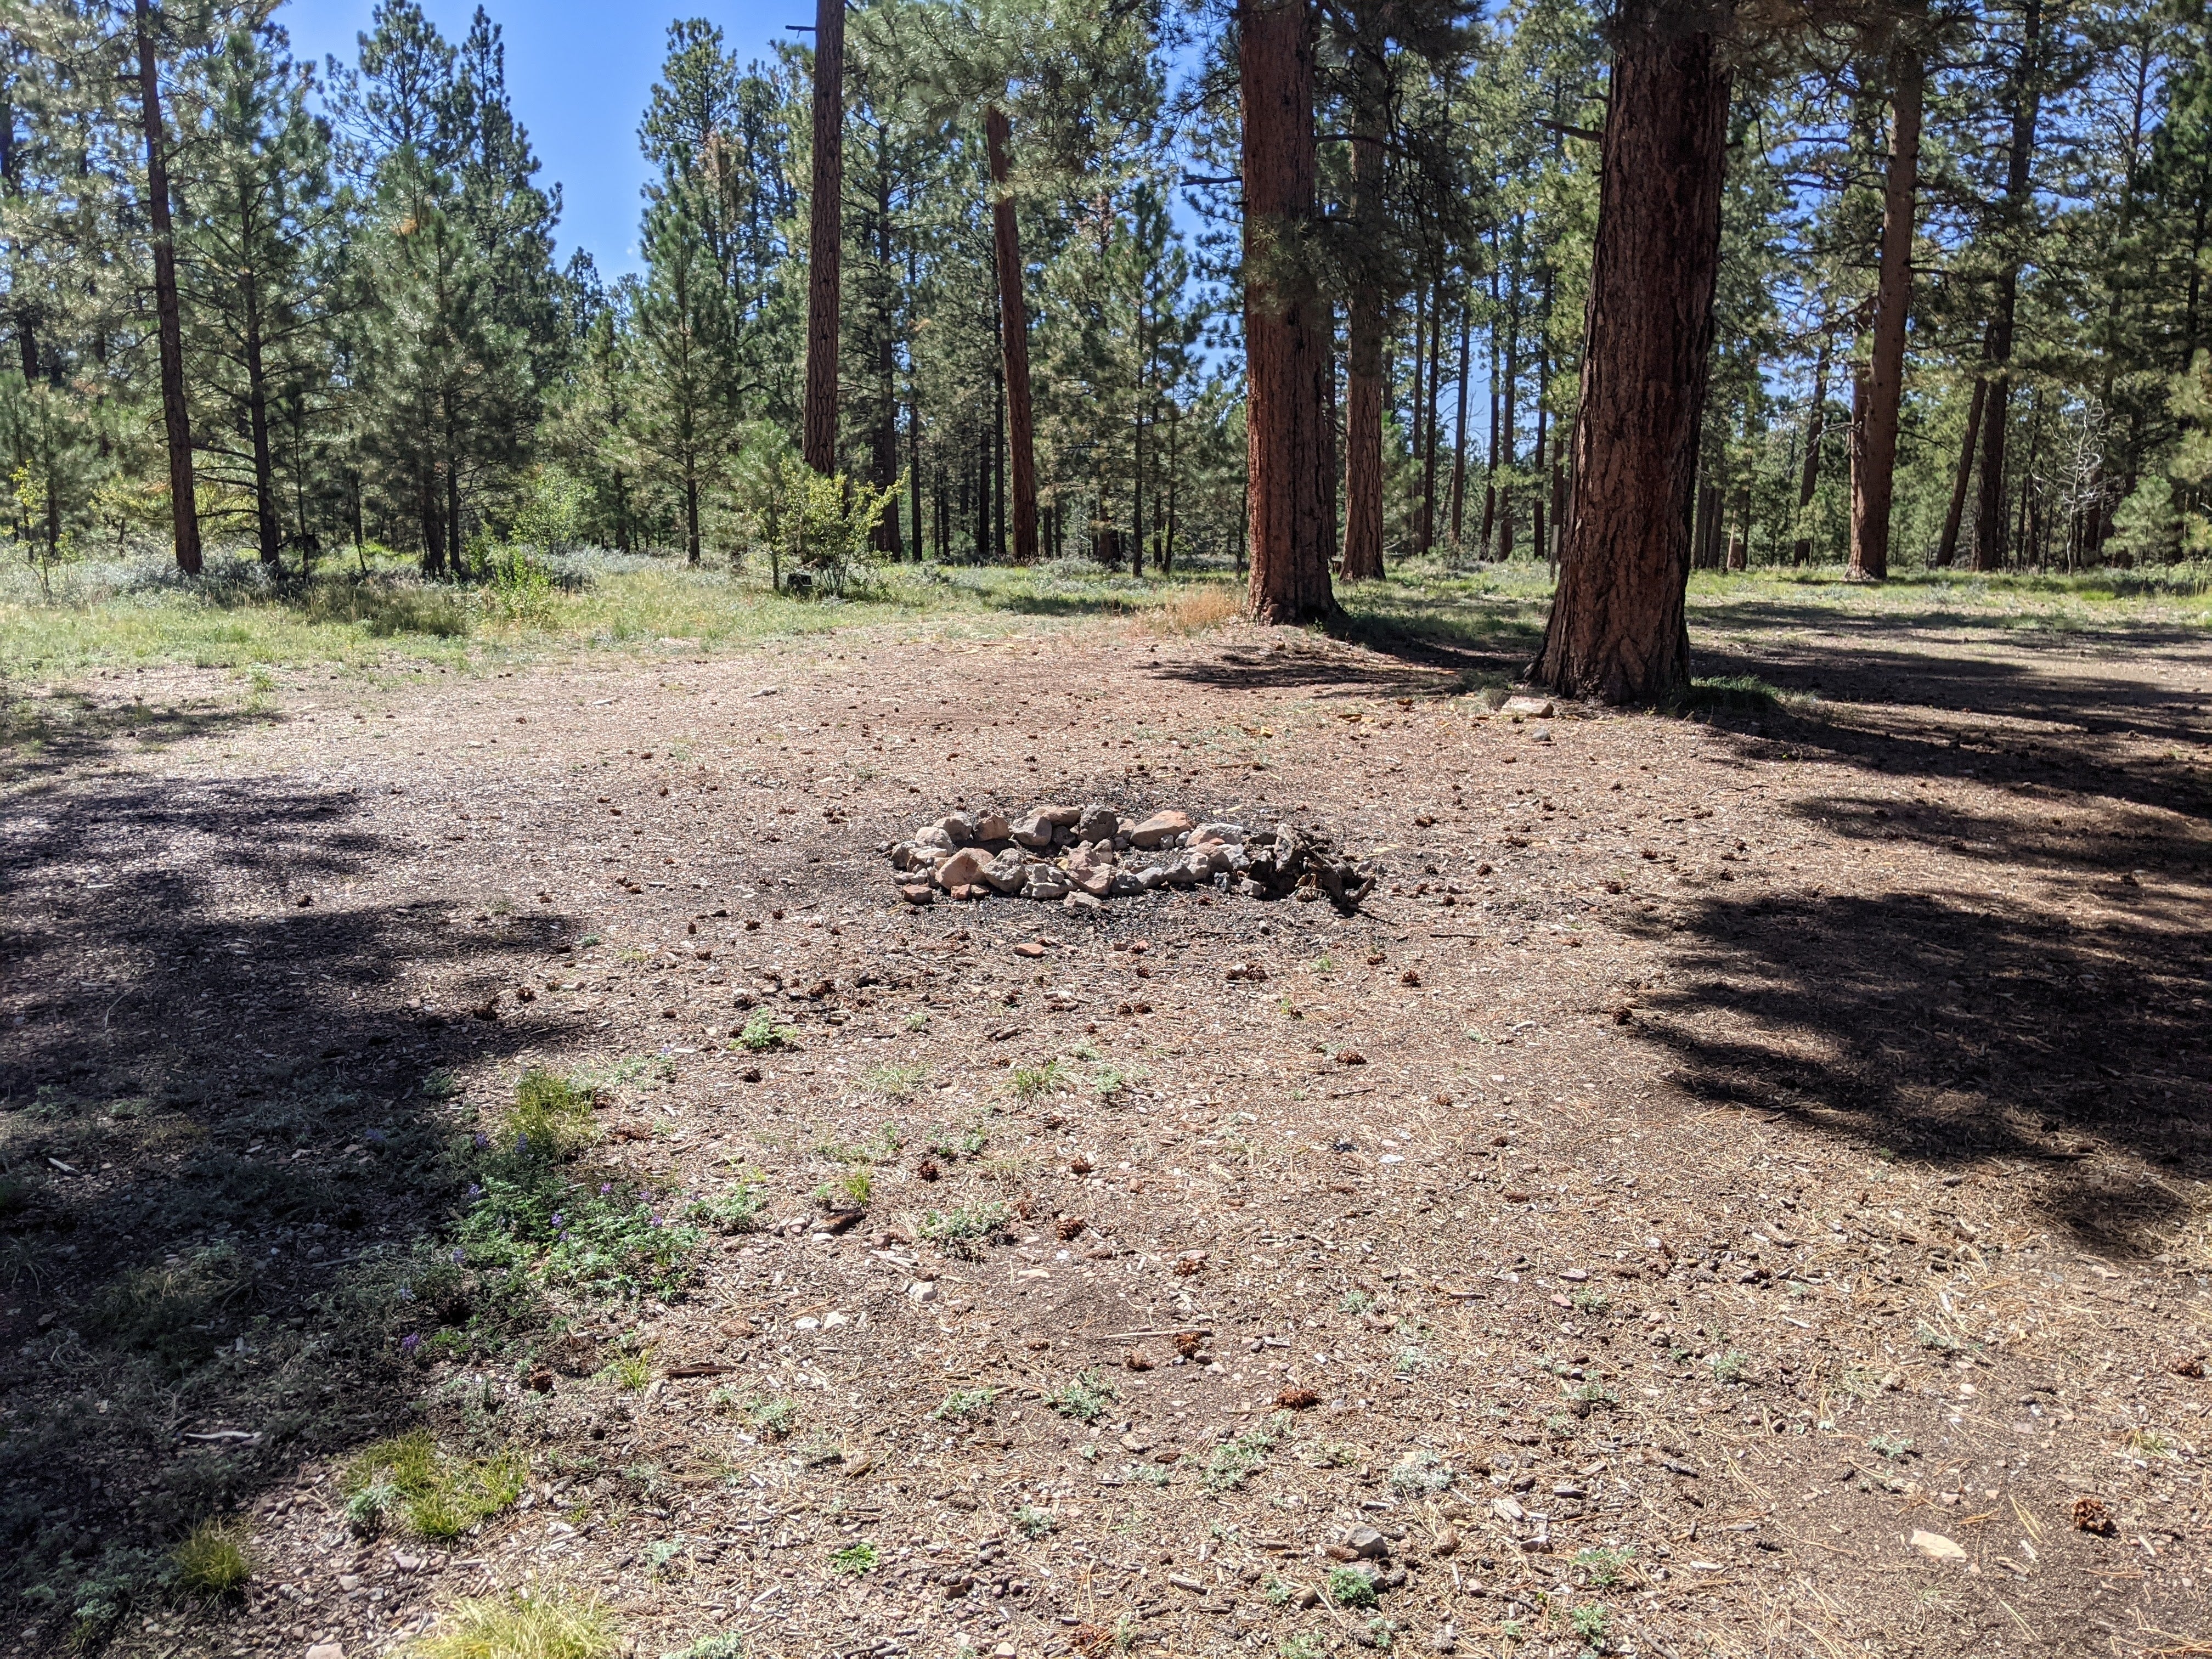 Camper submitted image from Forest Service Rd #205/225 Upper Dispersed Camping - 3